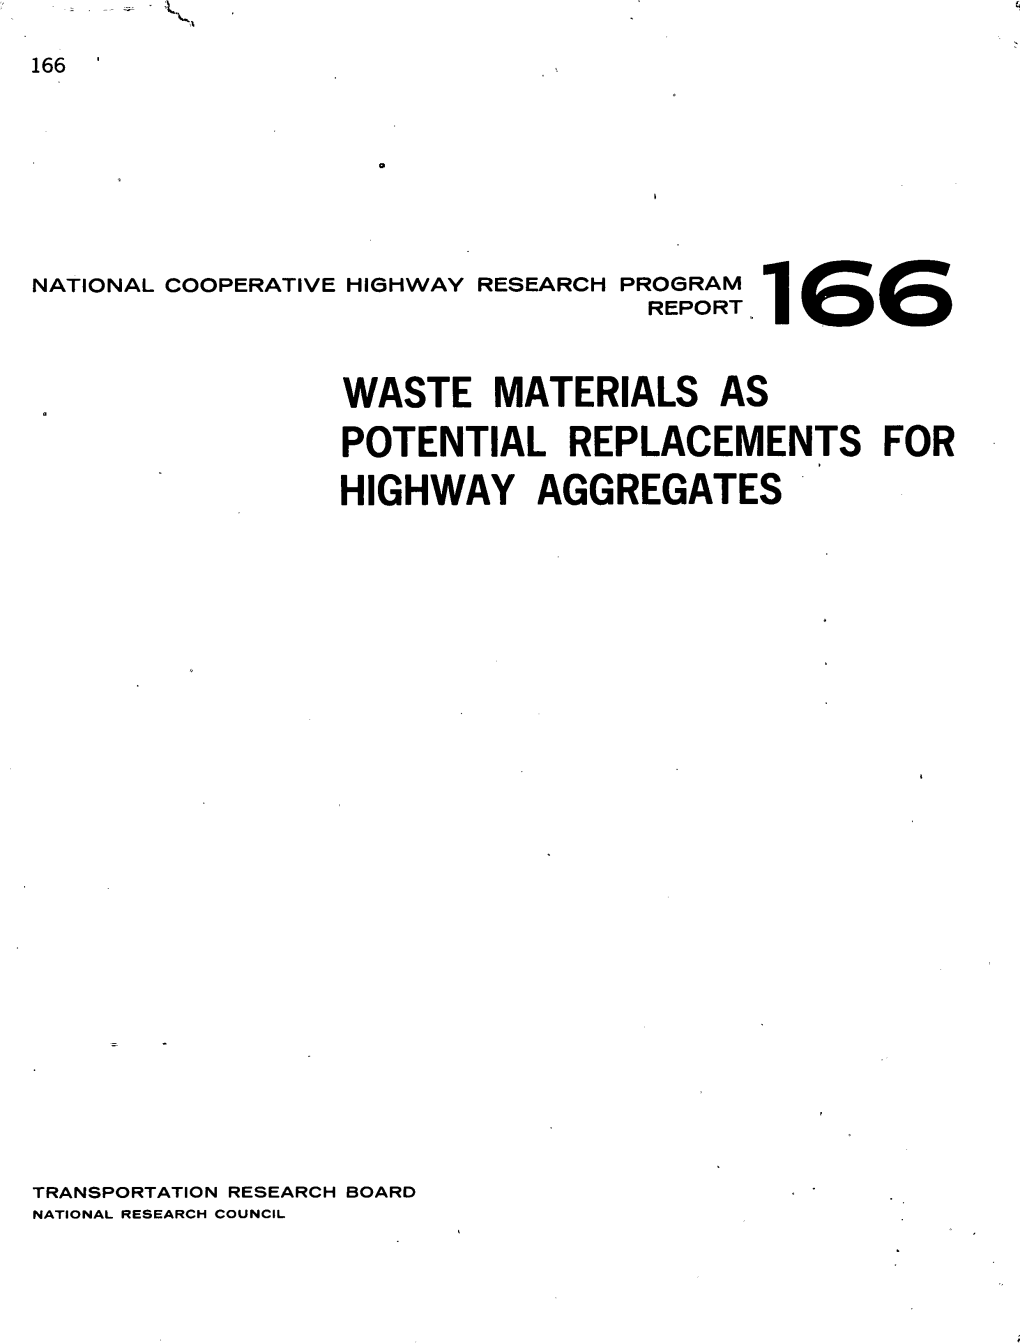 Waste Materials As Potential Replacements for Highway Aggregates